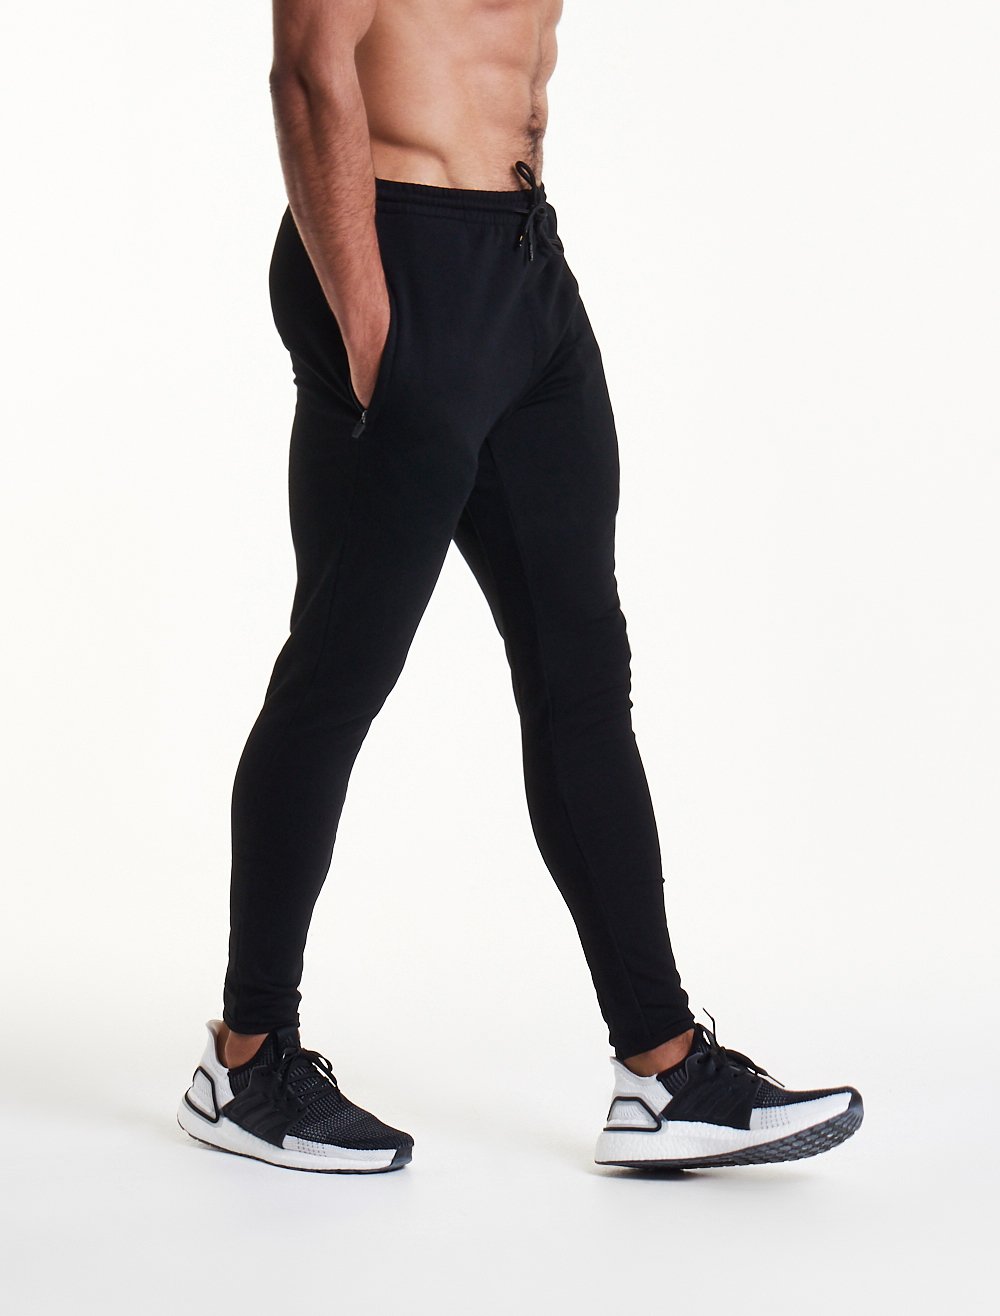 Pro-Fit Tapered Bottoms / Triple Black Pursue Fitness 7